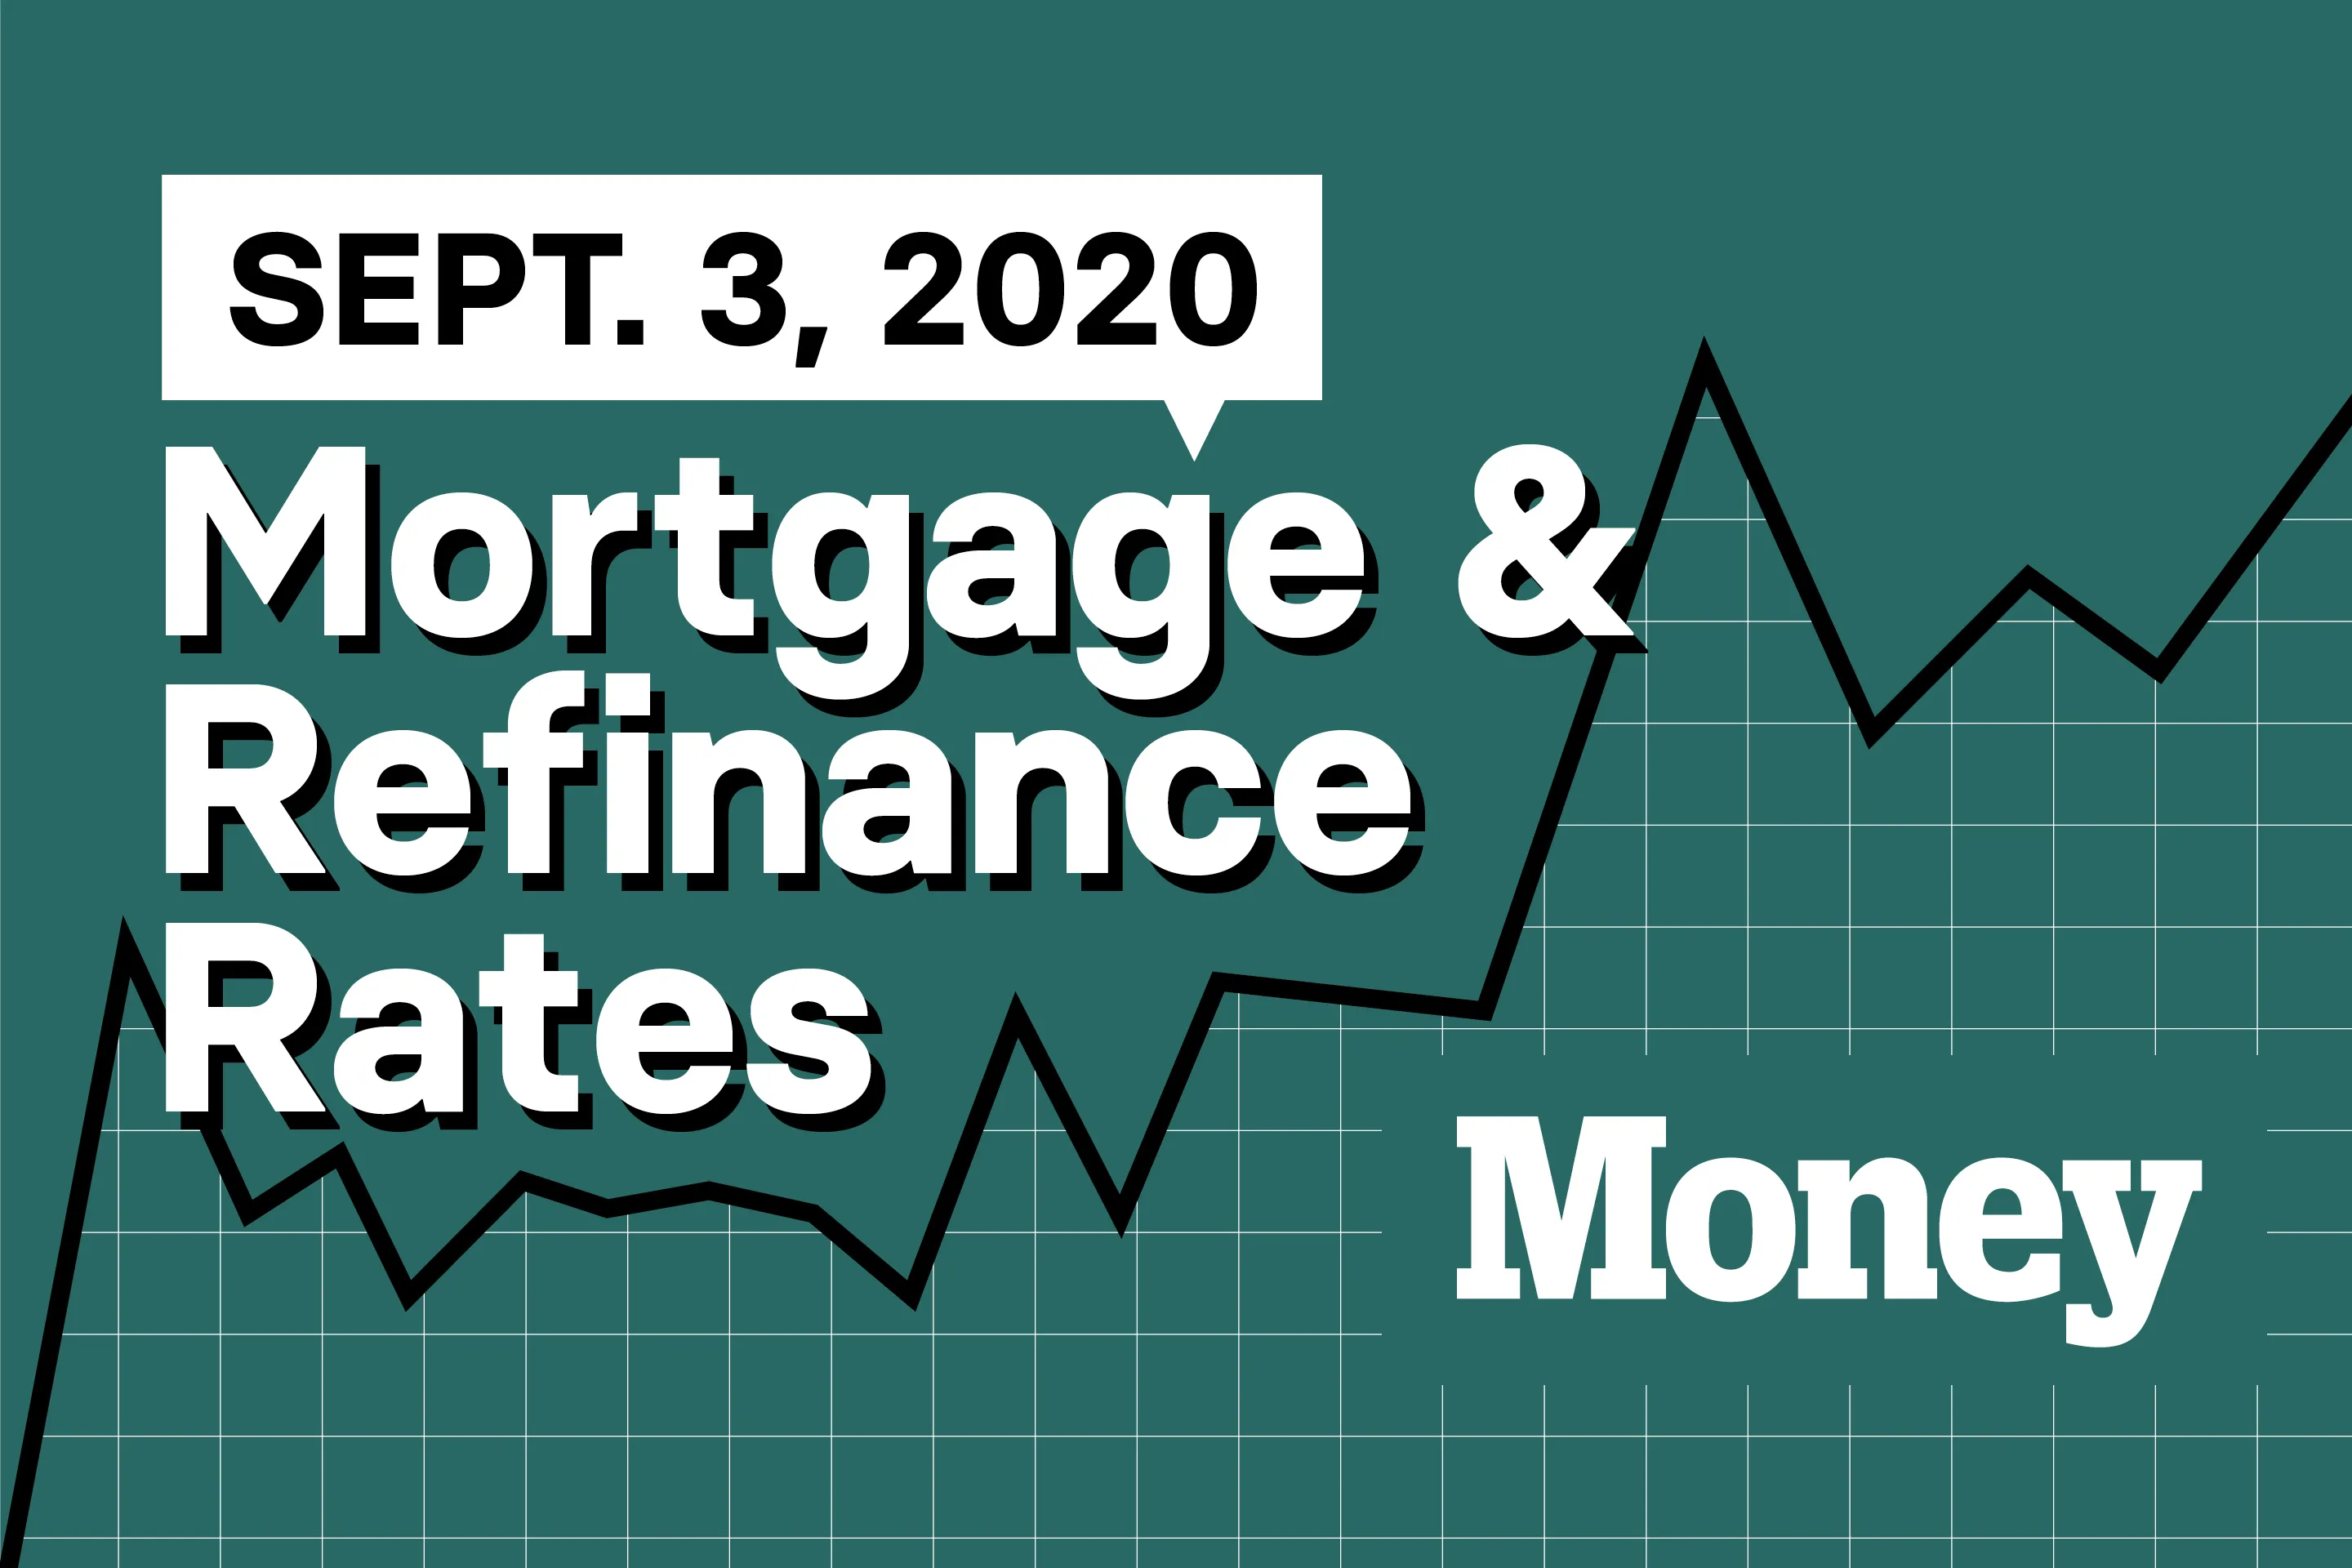 Here Are Today's Best Mortgage & Refinance Rates for September 3, 2020